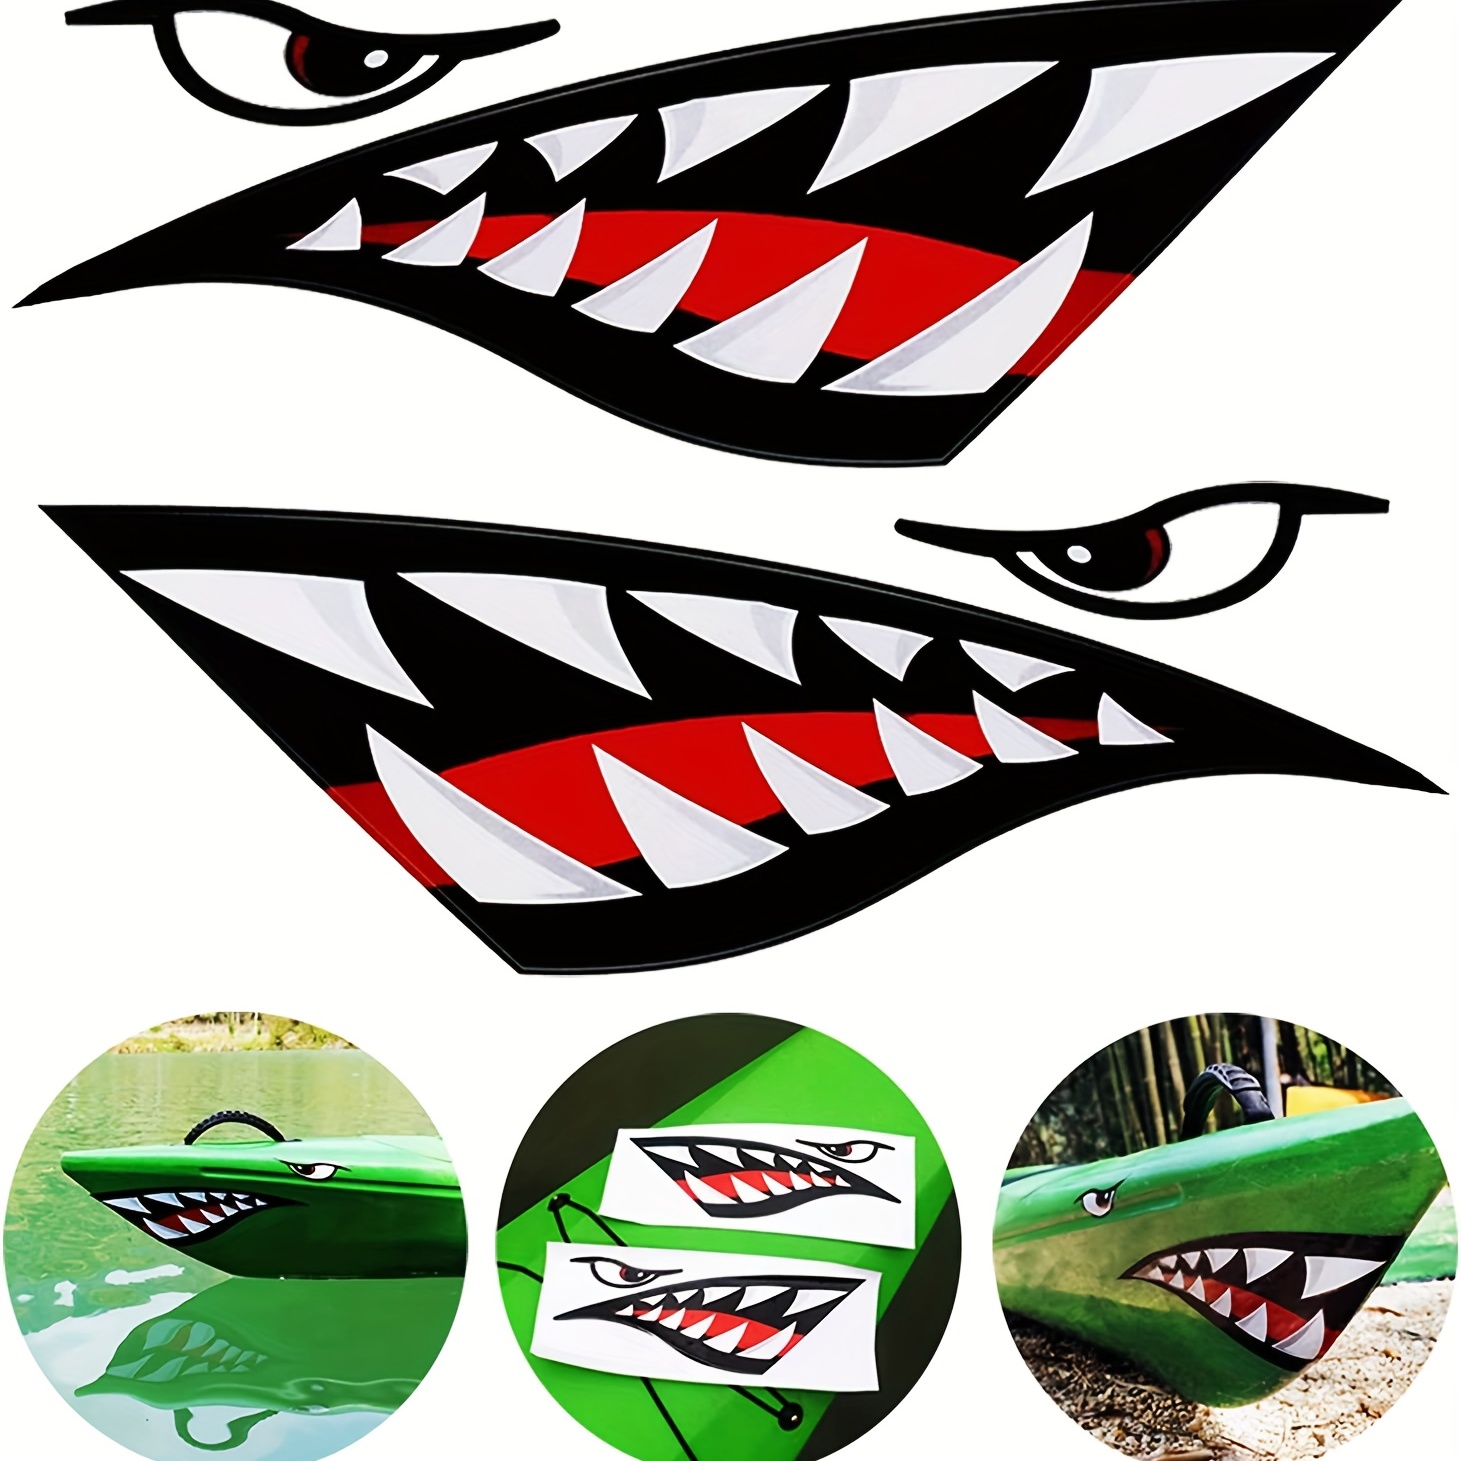 Sticker Fishing Boat Pet Decal Sticker Graphics For Decoration Surfboard  Boat